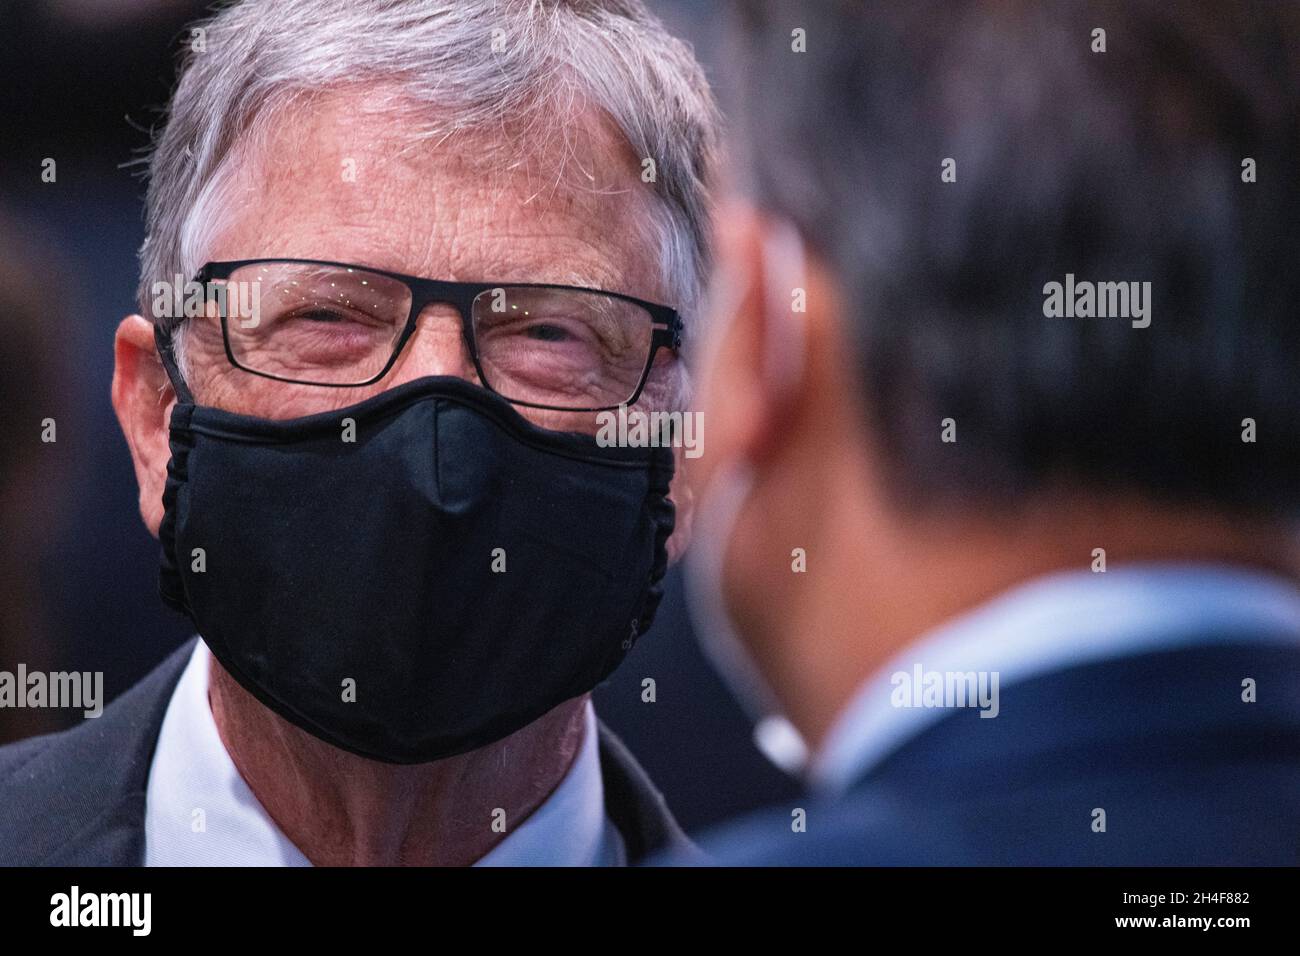 Glasgow, Scotland, UK. 2nd Nov, 2021. PICTURED: Bill Gates, CEO of Microsoft. World leaders come together at the COP26 Climate Change Conference in Glasgow this afternoon. Credit: Colin Fisher/Alamy Live News Stock Photo